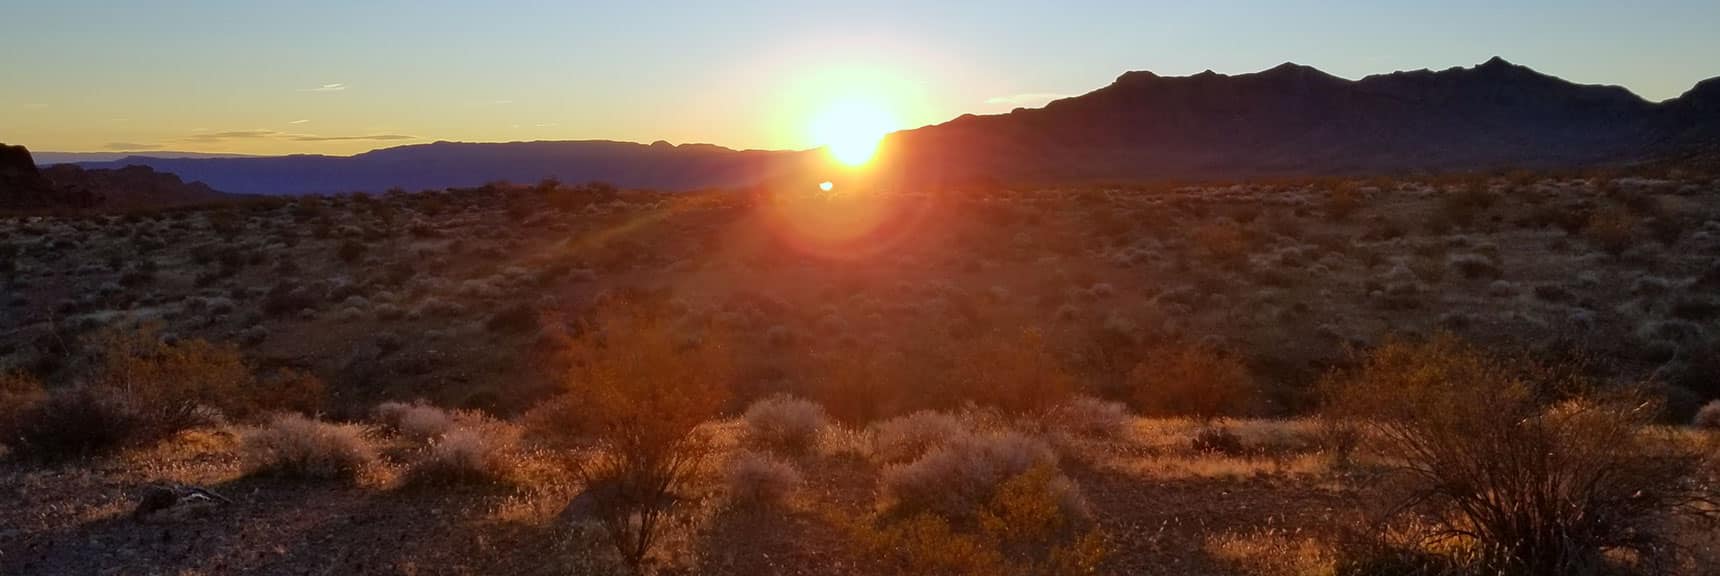 Sunrise to the East of the Trailhead for Prospect Trail in Valley of Fire State Park, Nevada